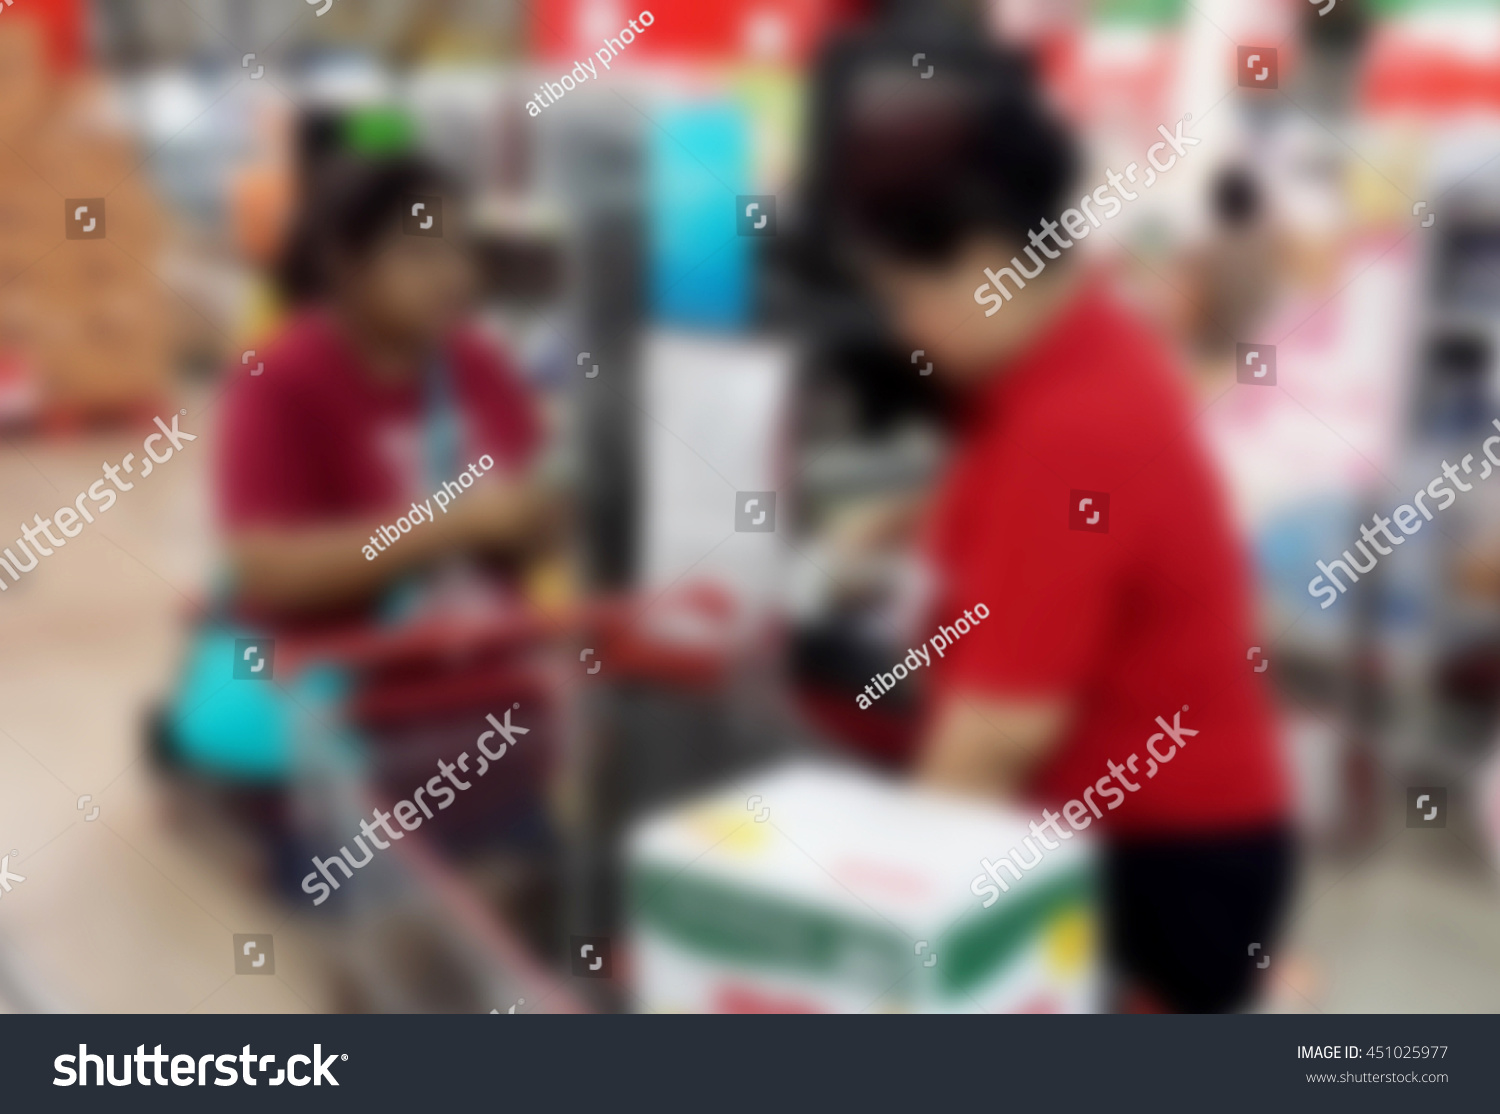 Blurred abstract background of in supermarket #451025977